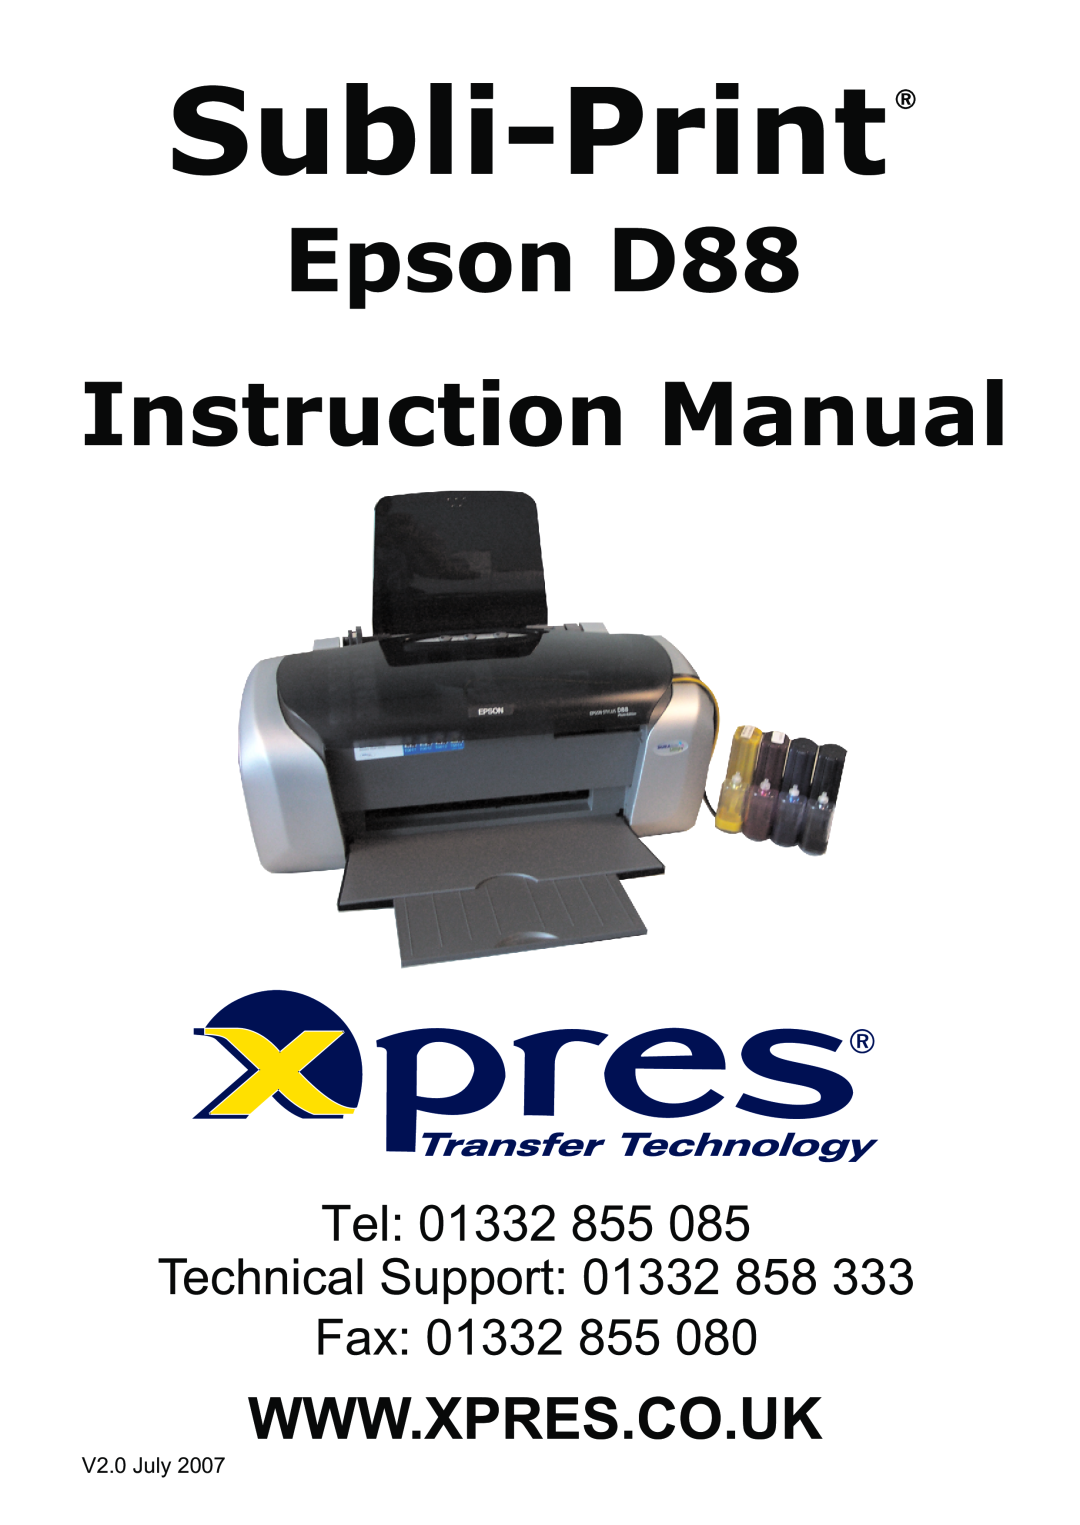 Epson manual For EPSON Stylus→ D88, SubliJet IQ, Getting Started Guide, Revision 2/2006 